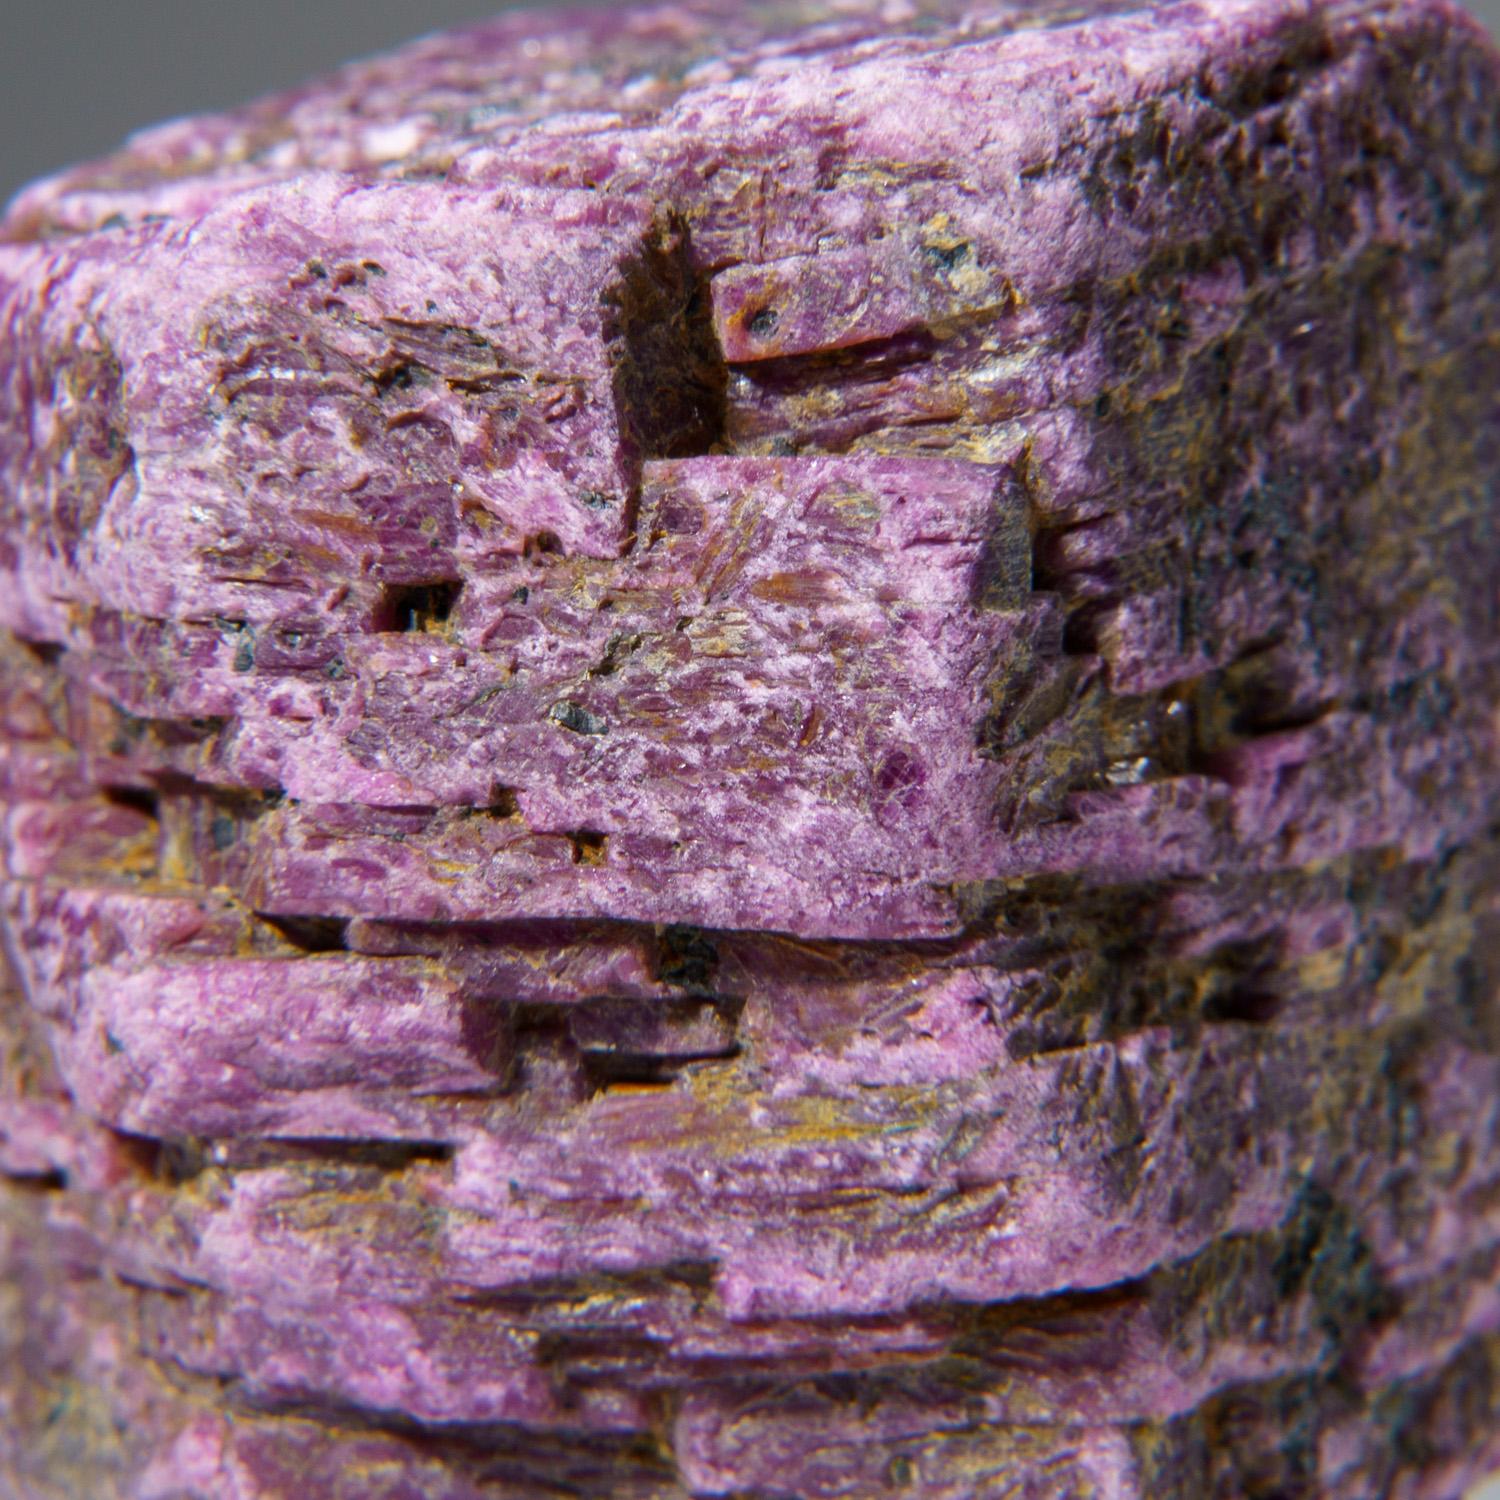 From Mysuru (formerly Mysore), Karnataka, India

Translucent pink ruby crystal, the pink gem variety of the mineral species corundum, with remnants of greenish kyanite matrix included on the surfaces. The prism faces of the crystal have many minute